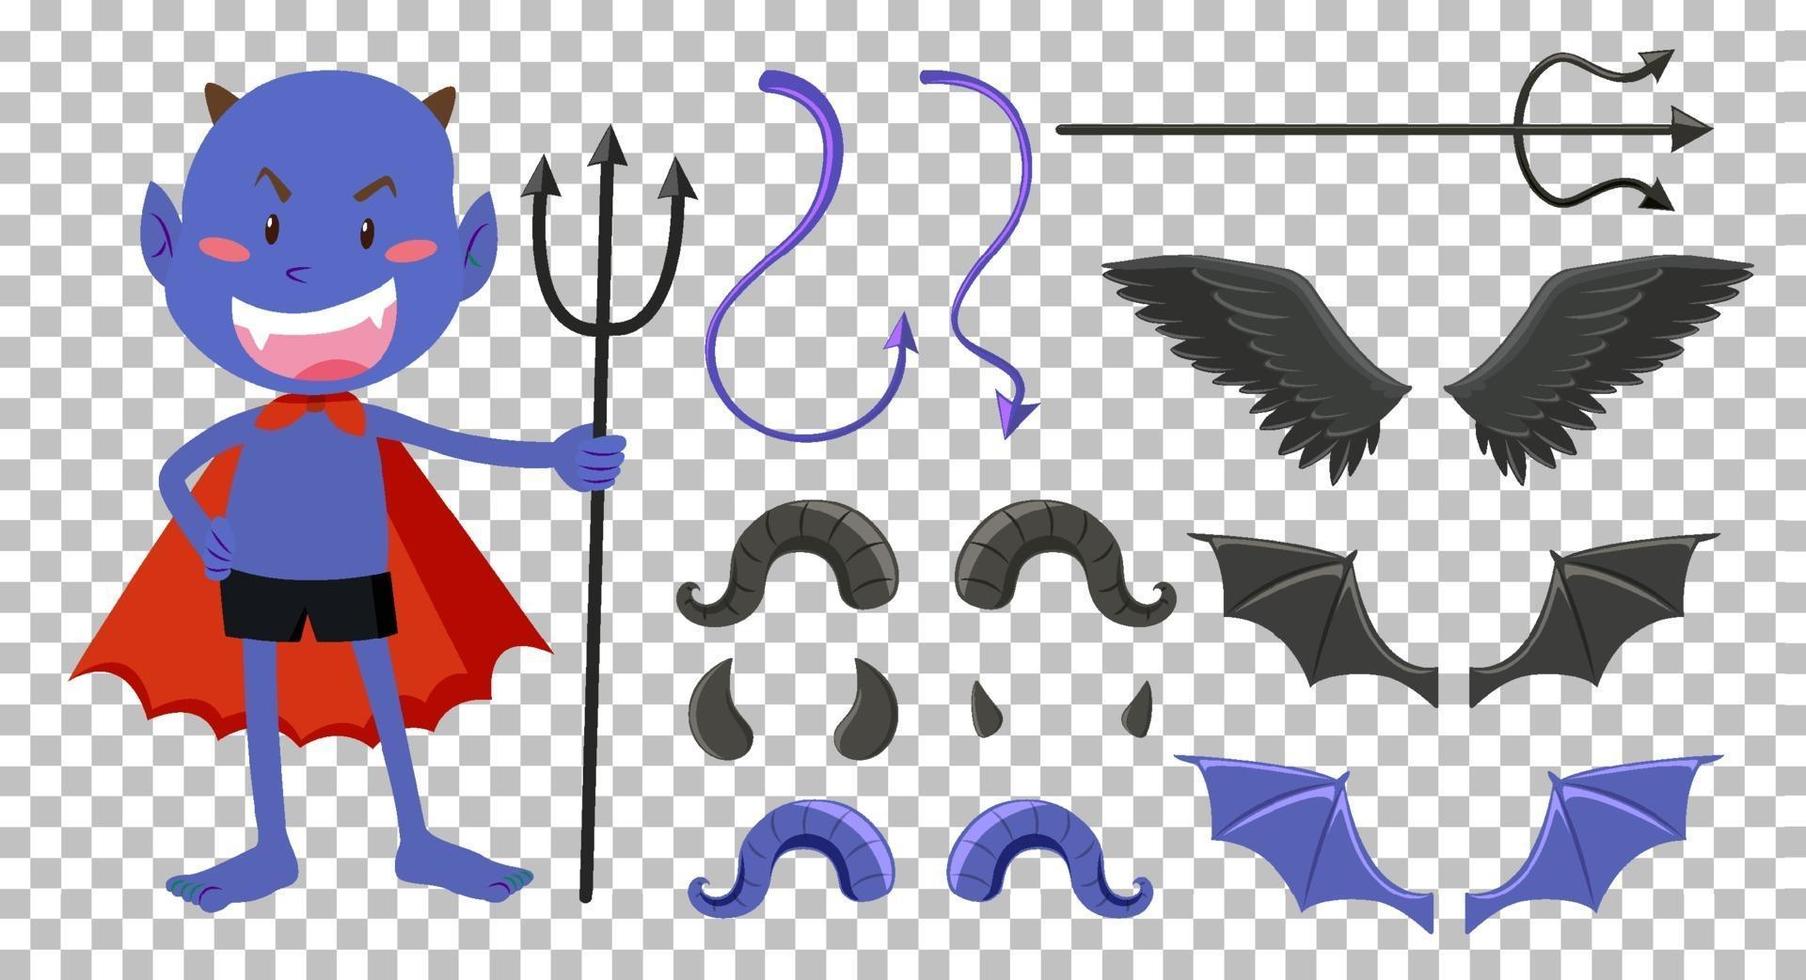 Set of devil and angel object decor vector